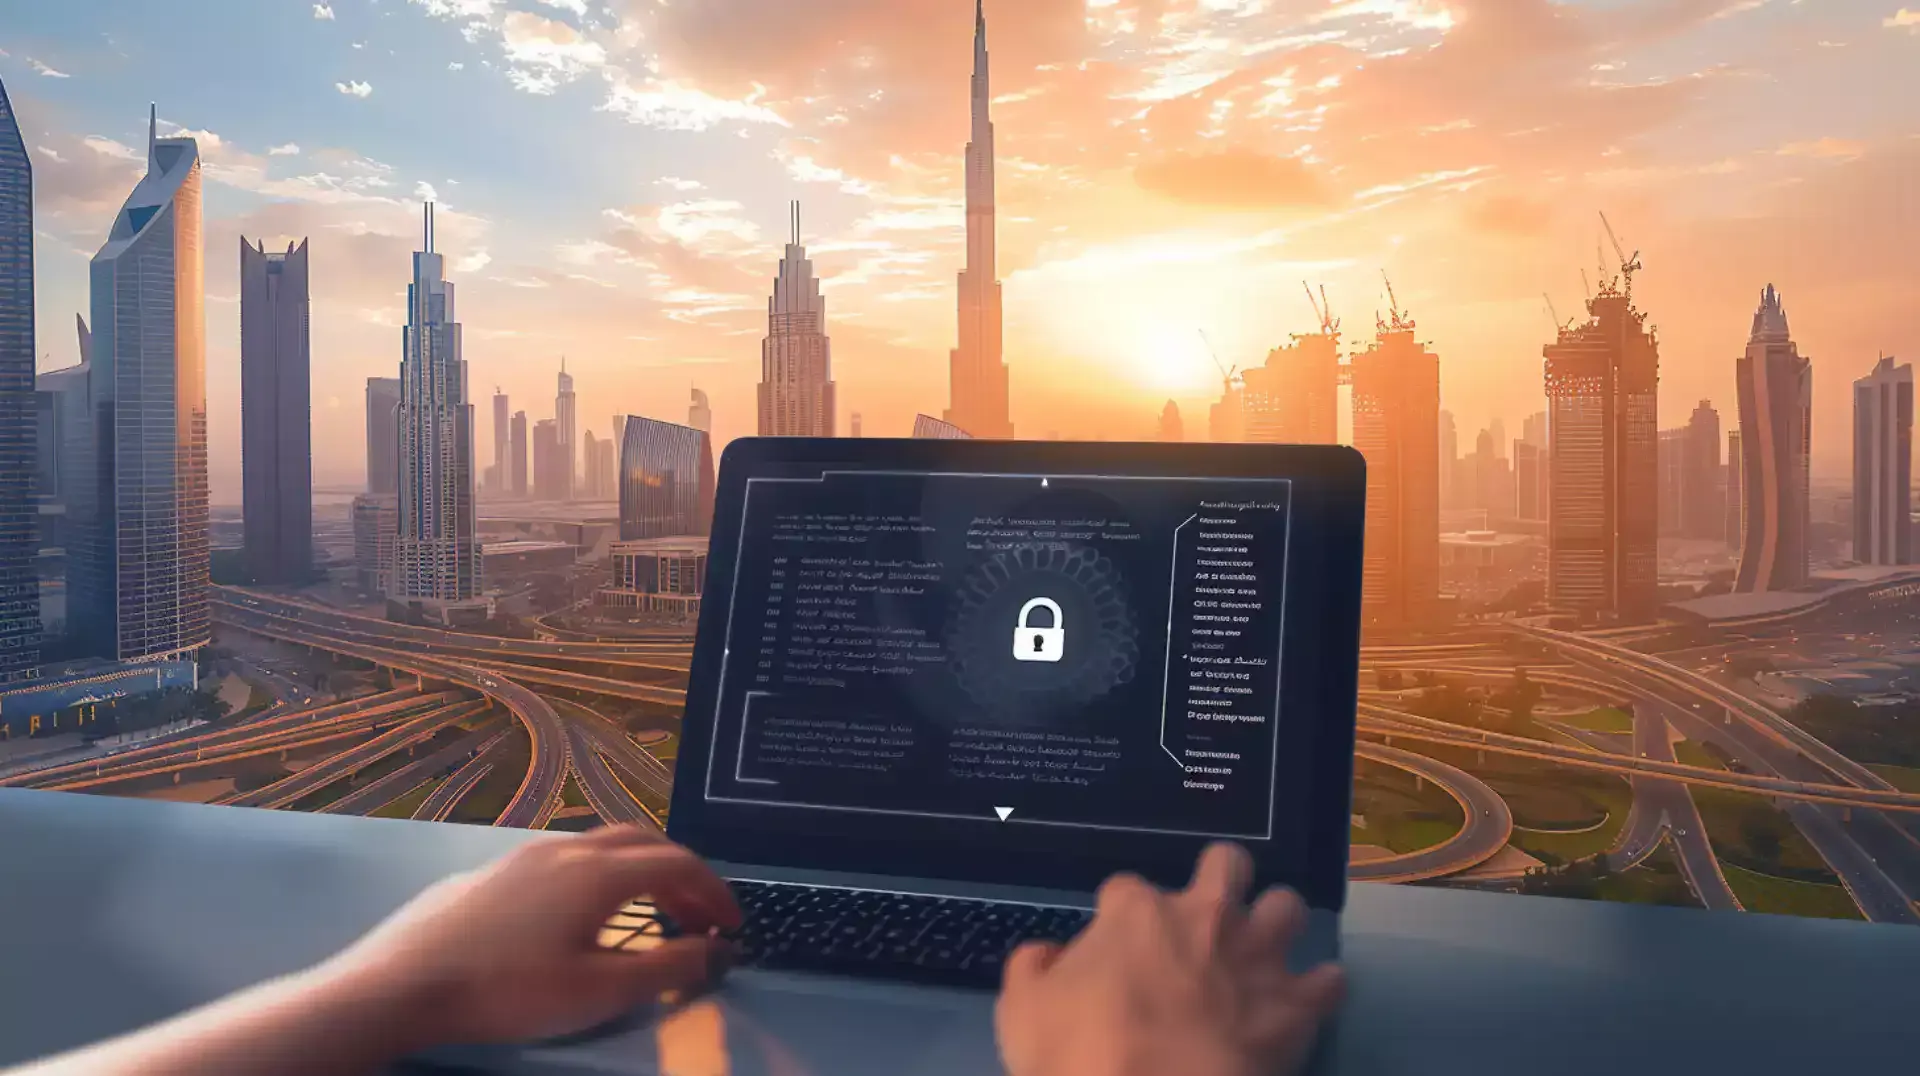 Dubai skyline overlaid with cybersecurity imagery, symbolizing strategic investment in digital defense